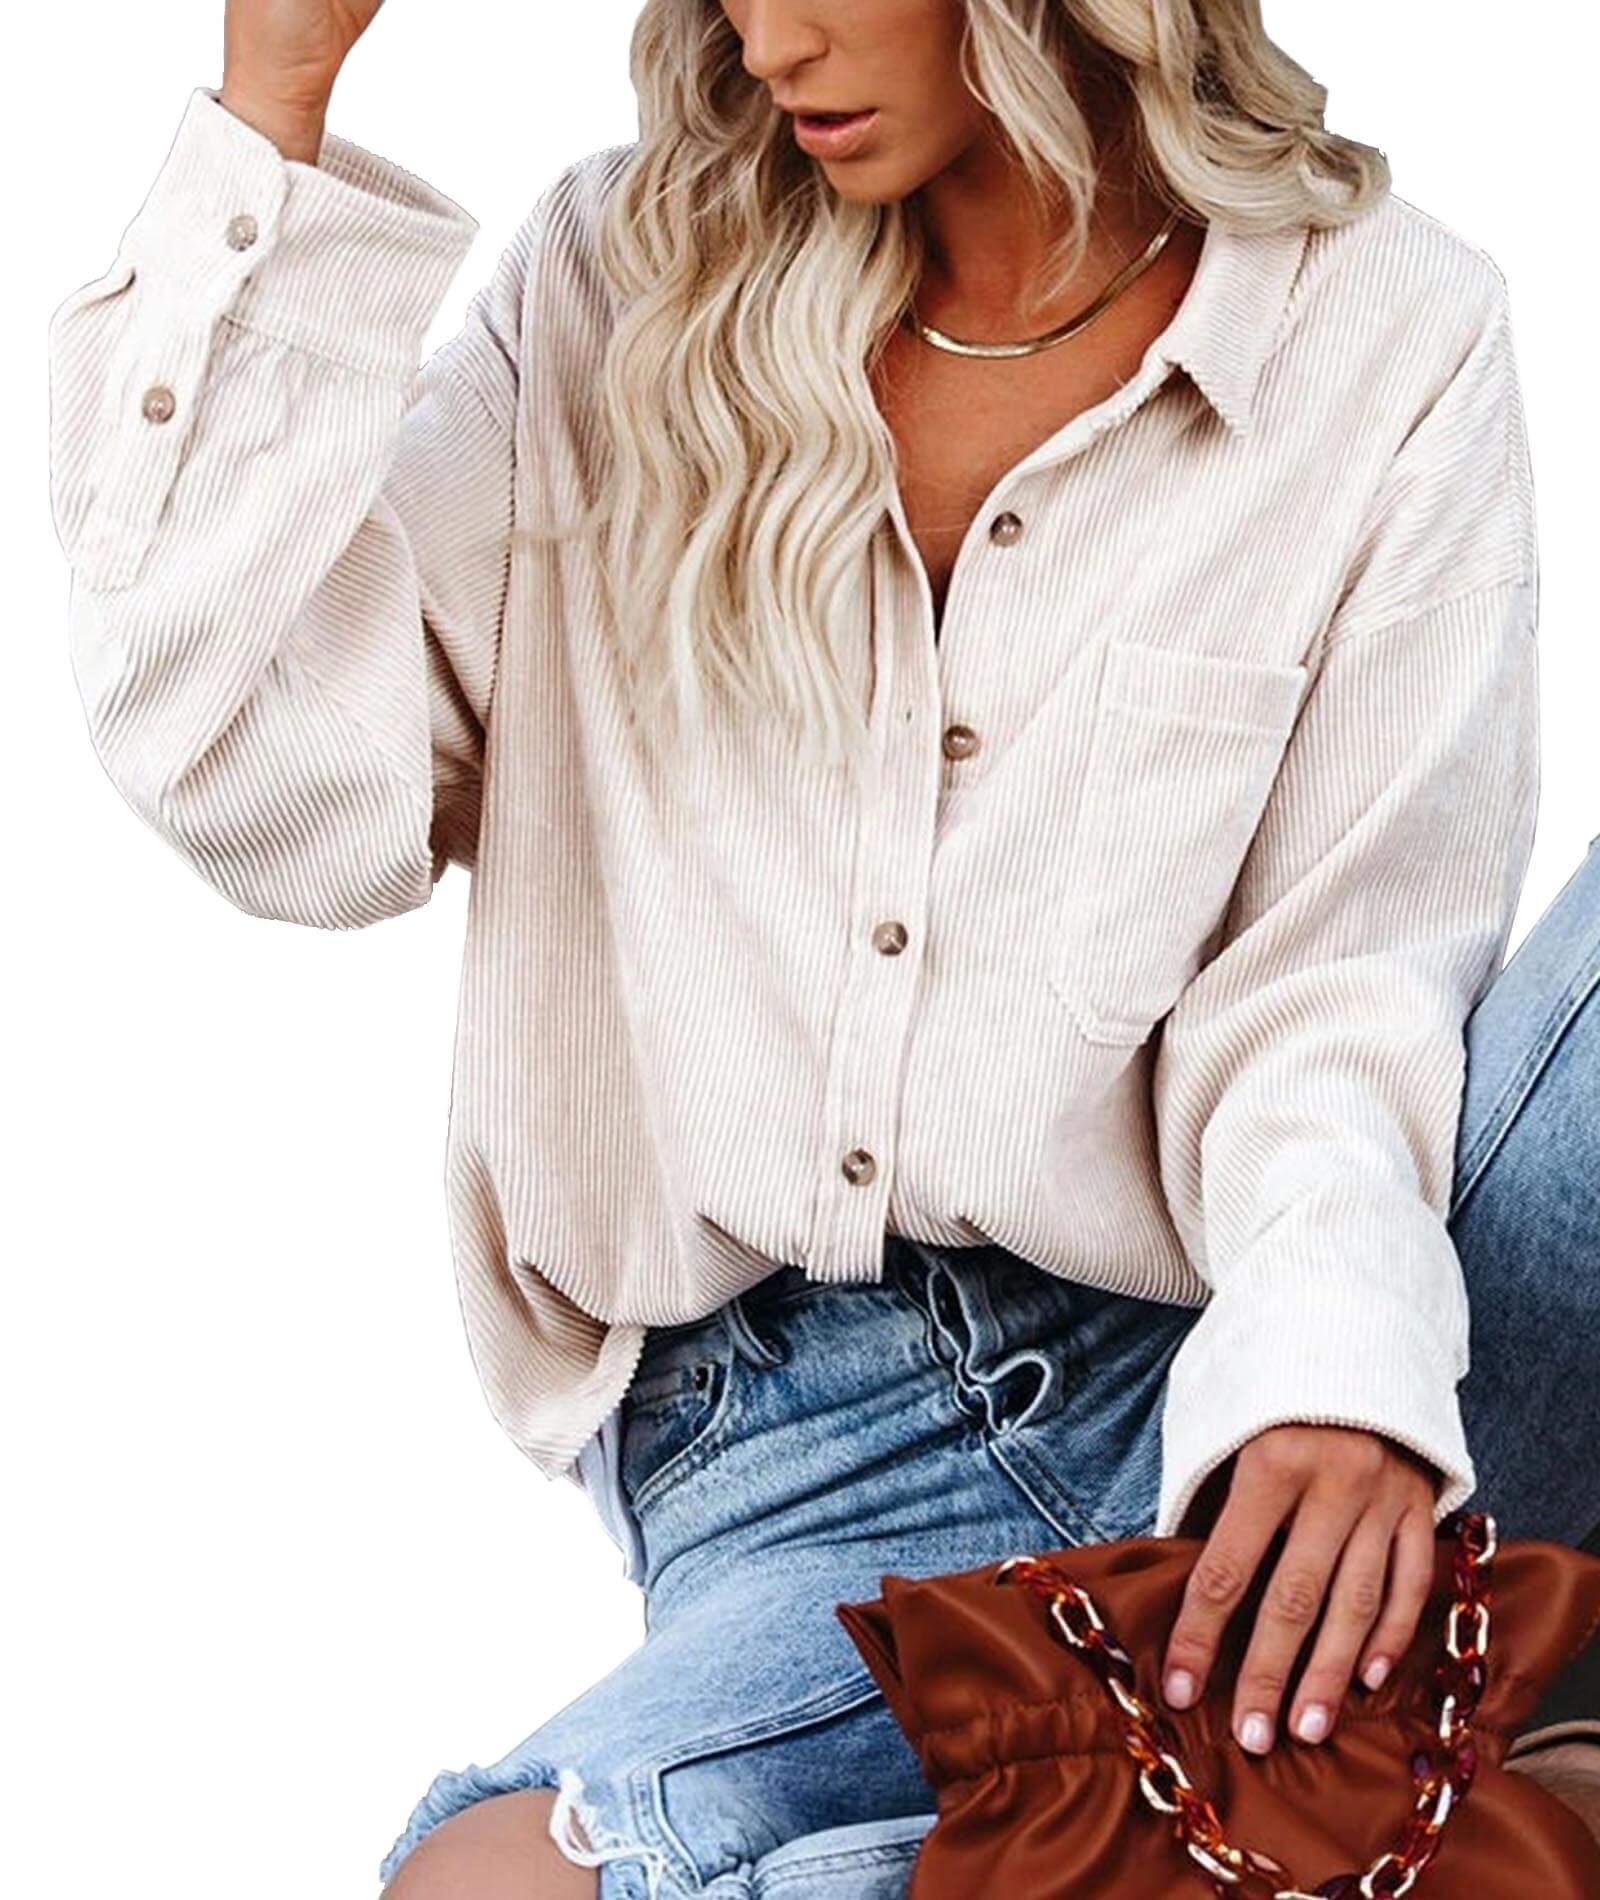  Women's Corduroy Blouse Top Long Sleeve Casual Cotton Chest Pocket Oversized Button Down Shirt Jacket